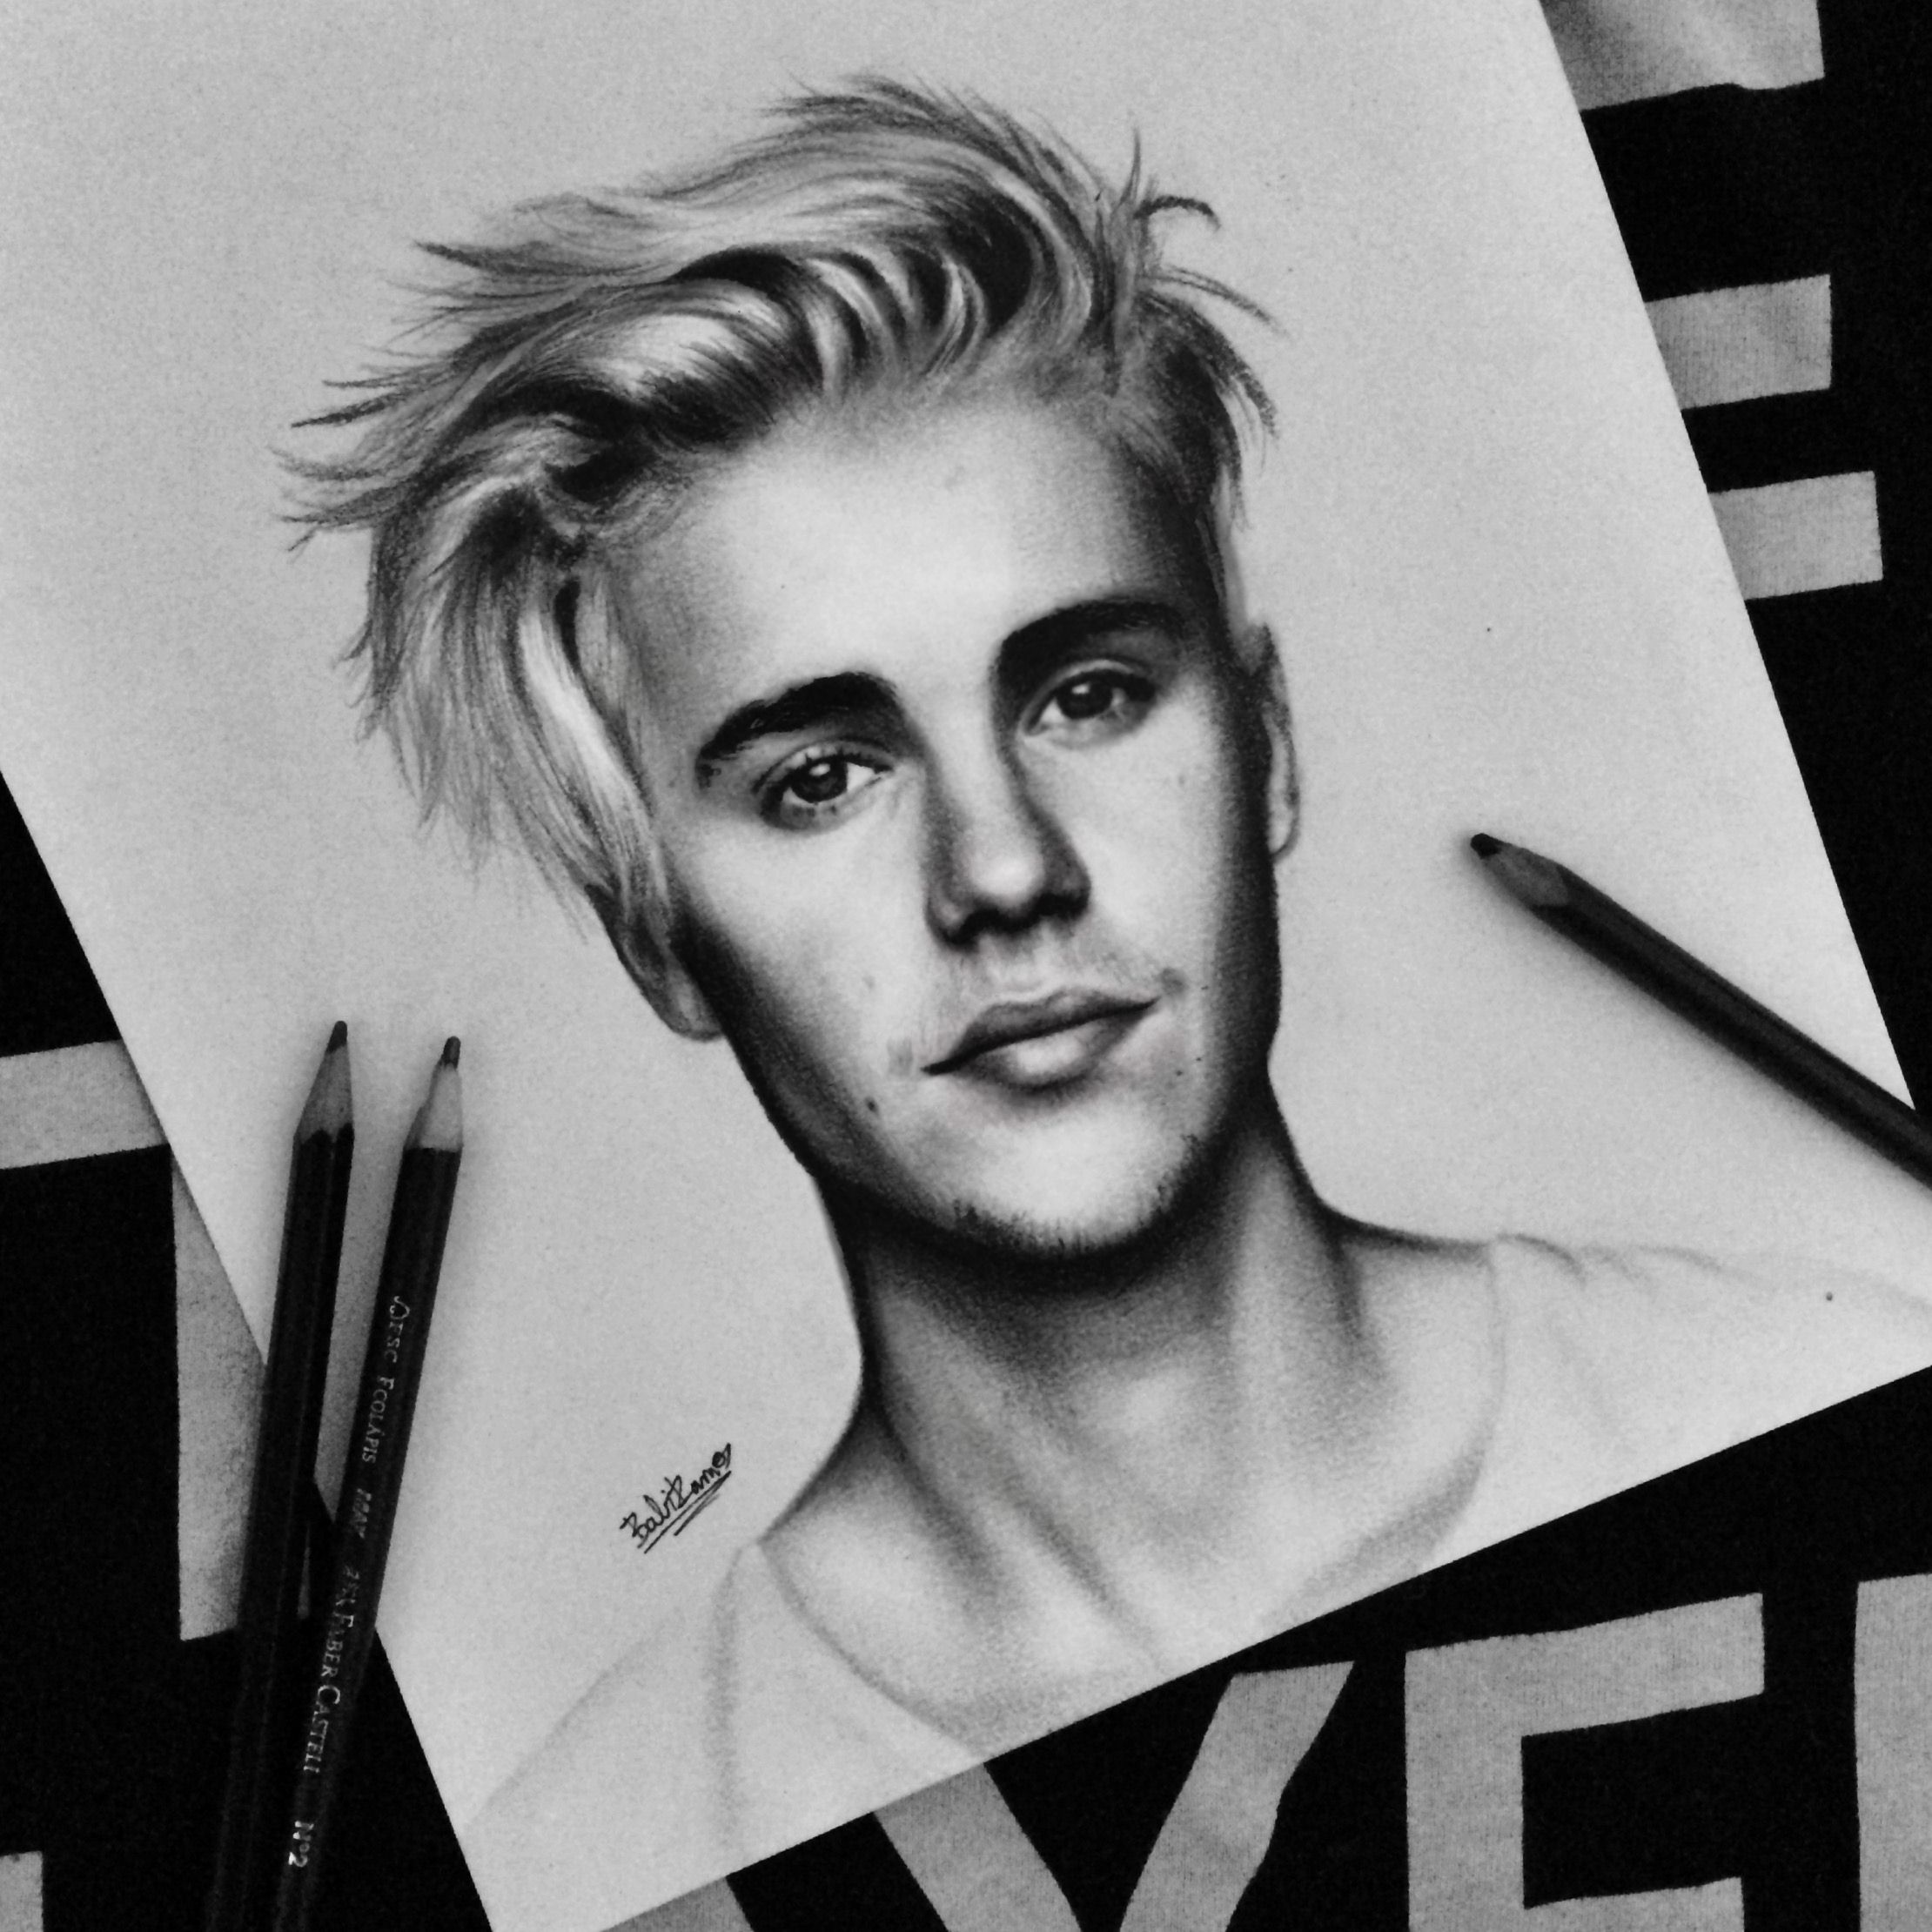 Justin Bieber Illustration Photos and Images